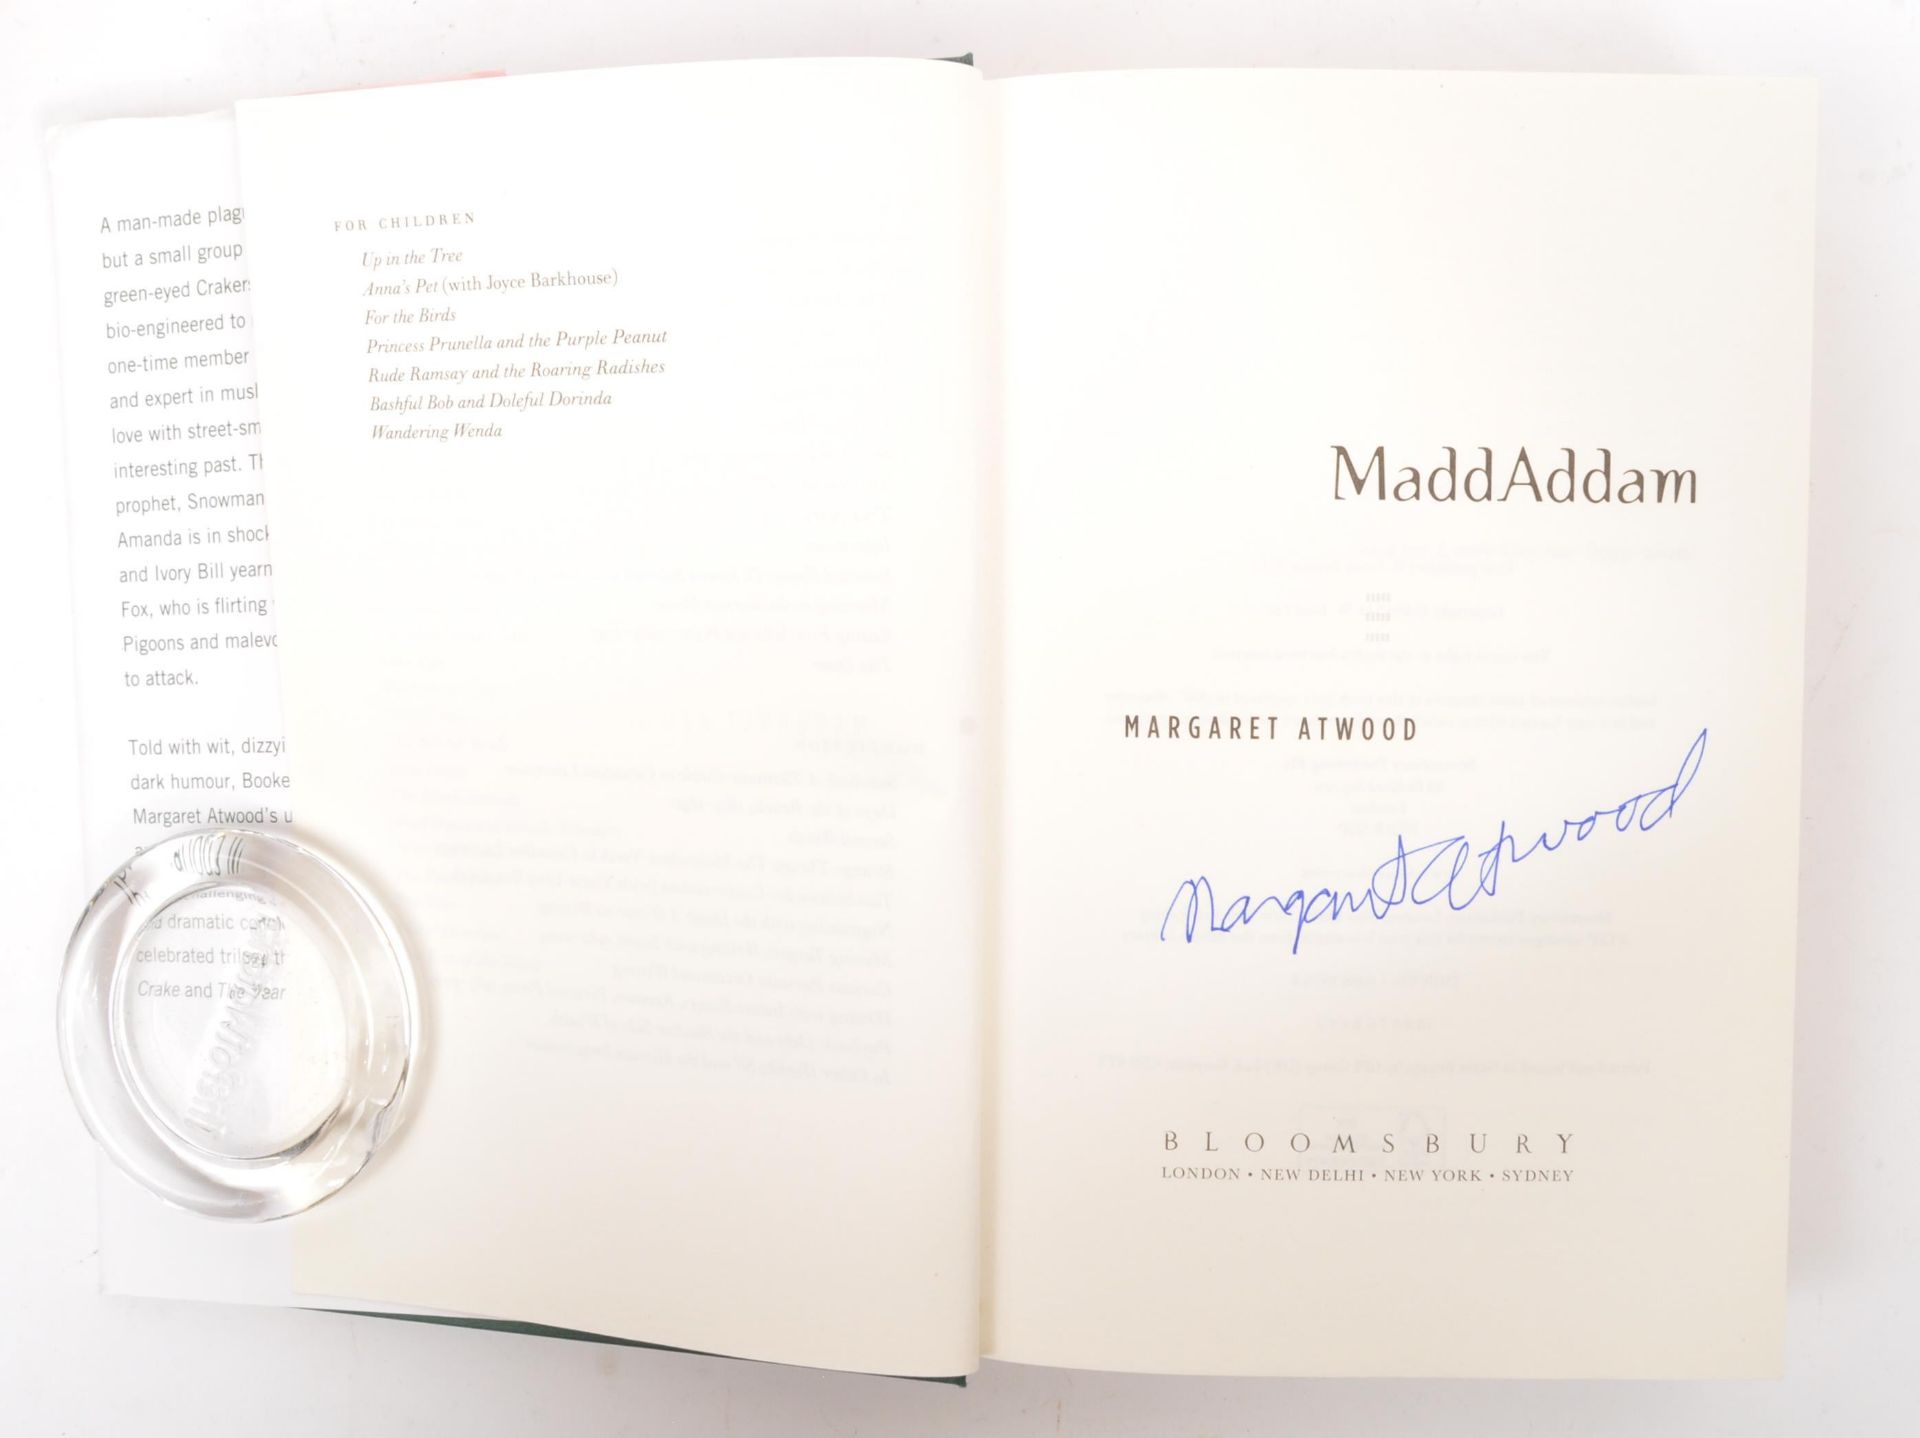 MARGARET ATWOOD - COLLECTION OF SIGNED FIRST EDITION NOVELS - Image 5 of 10